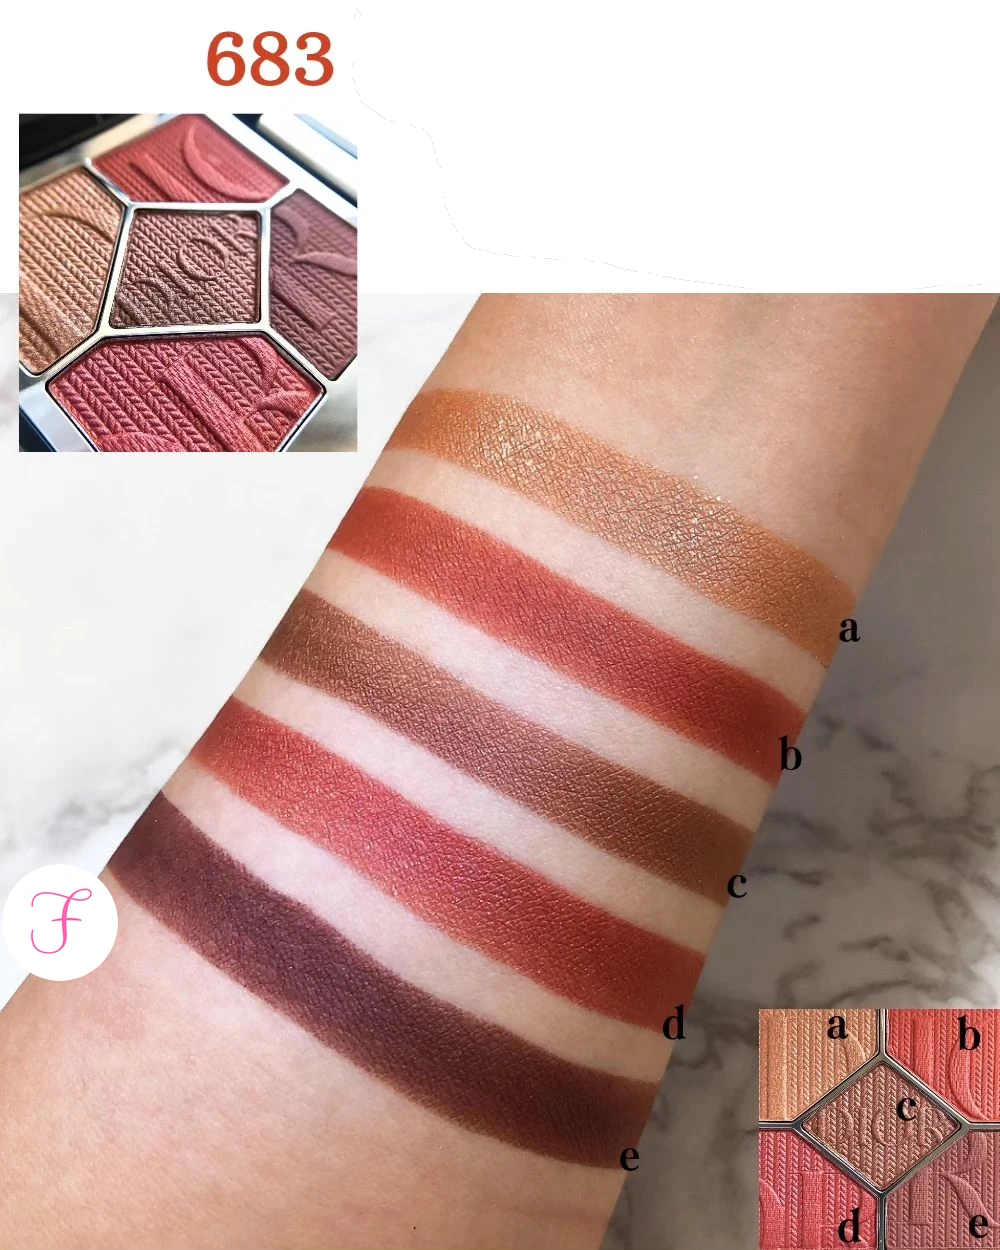 dior-palette-5-Couleurs-683-rouge-saga-swatches